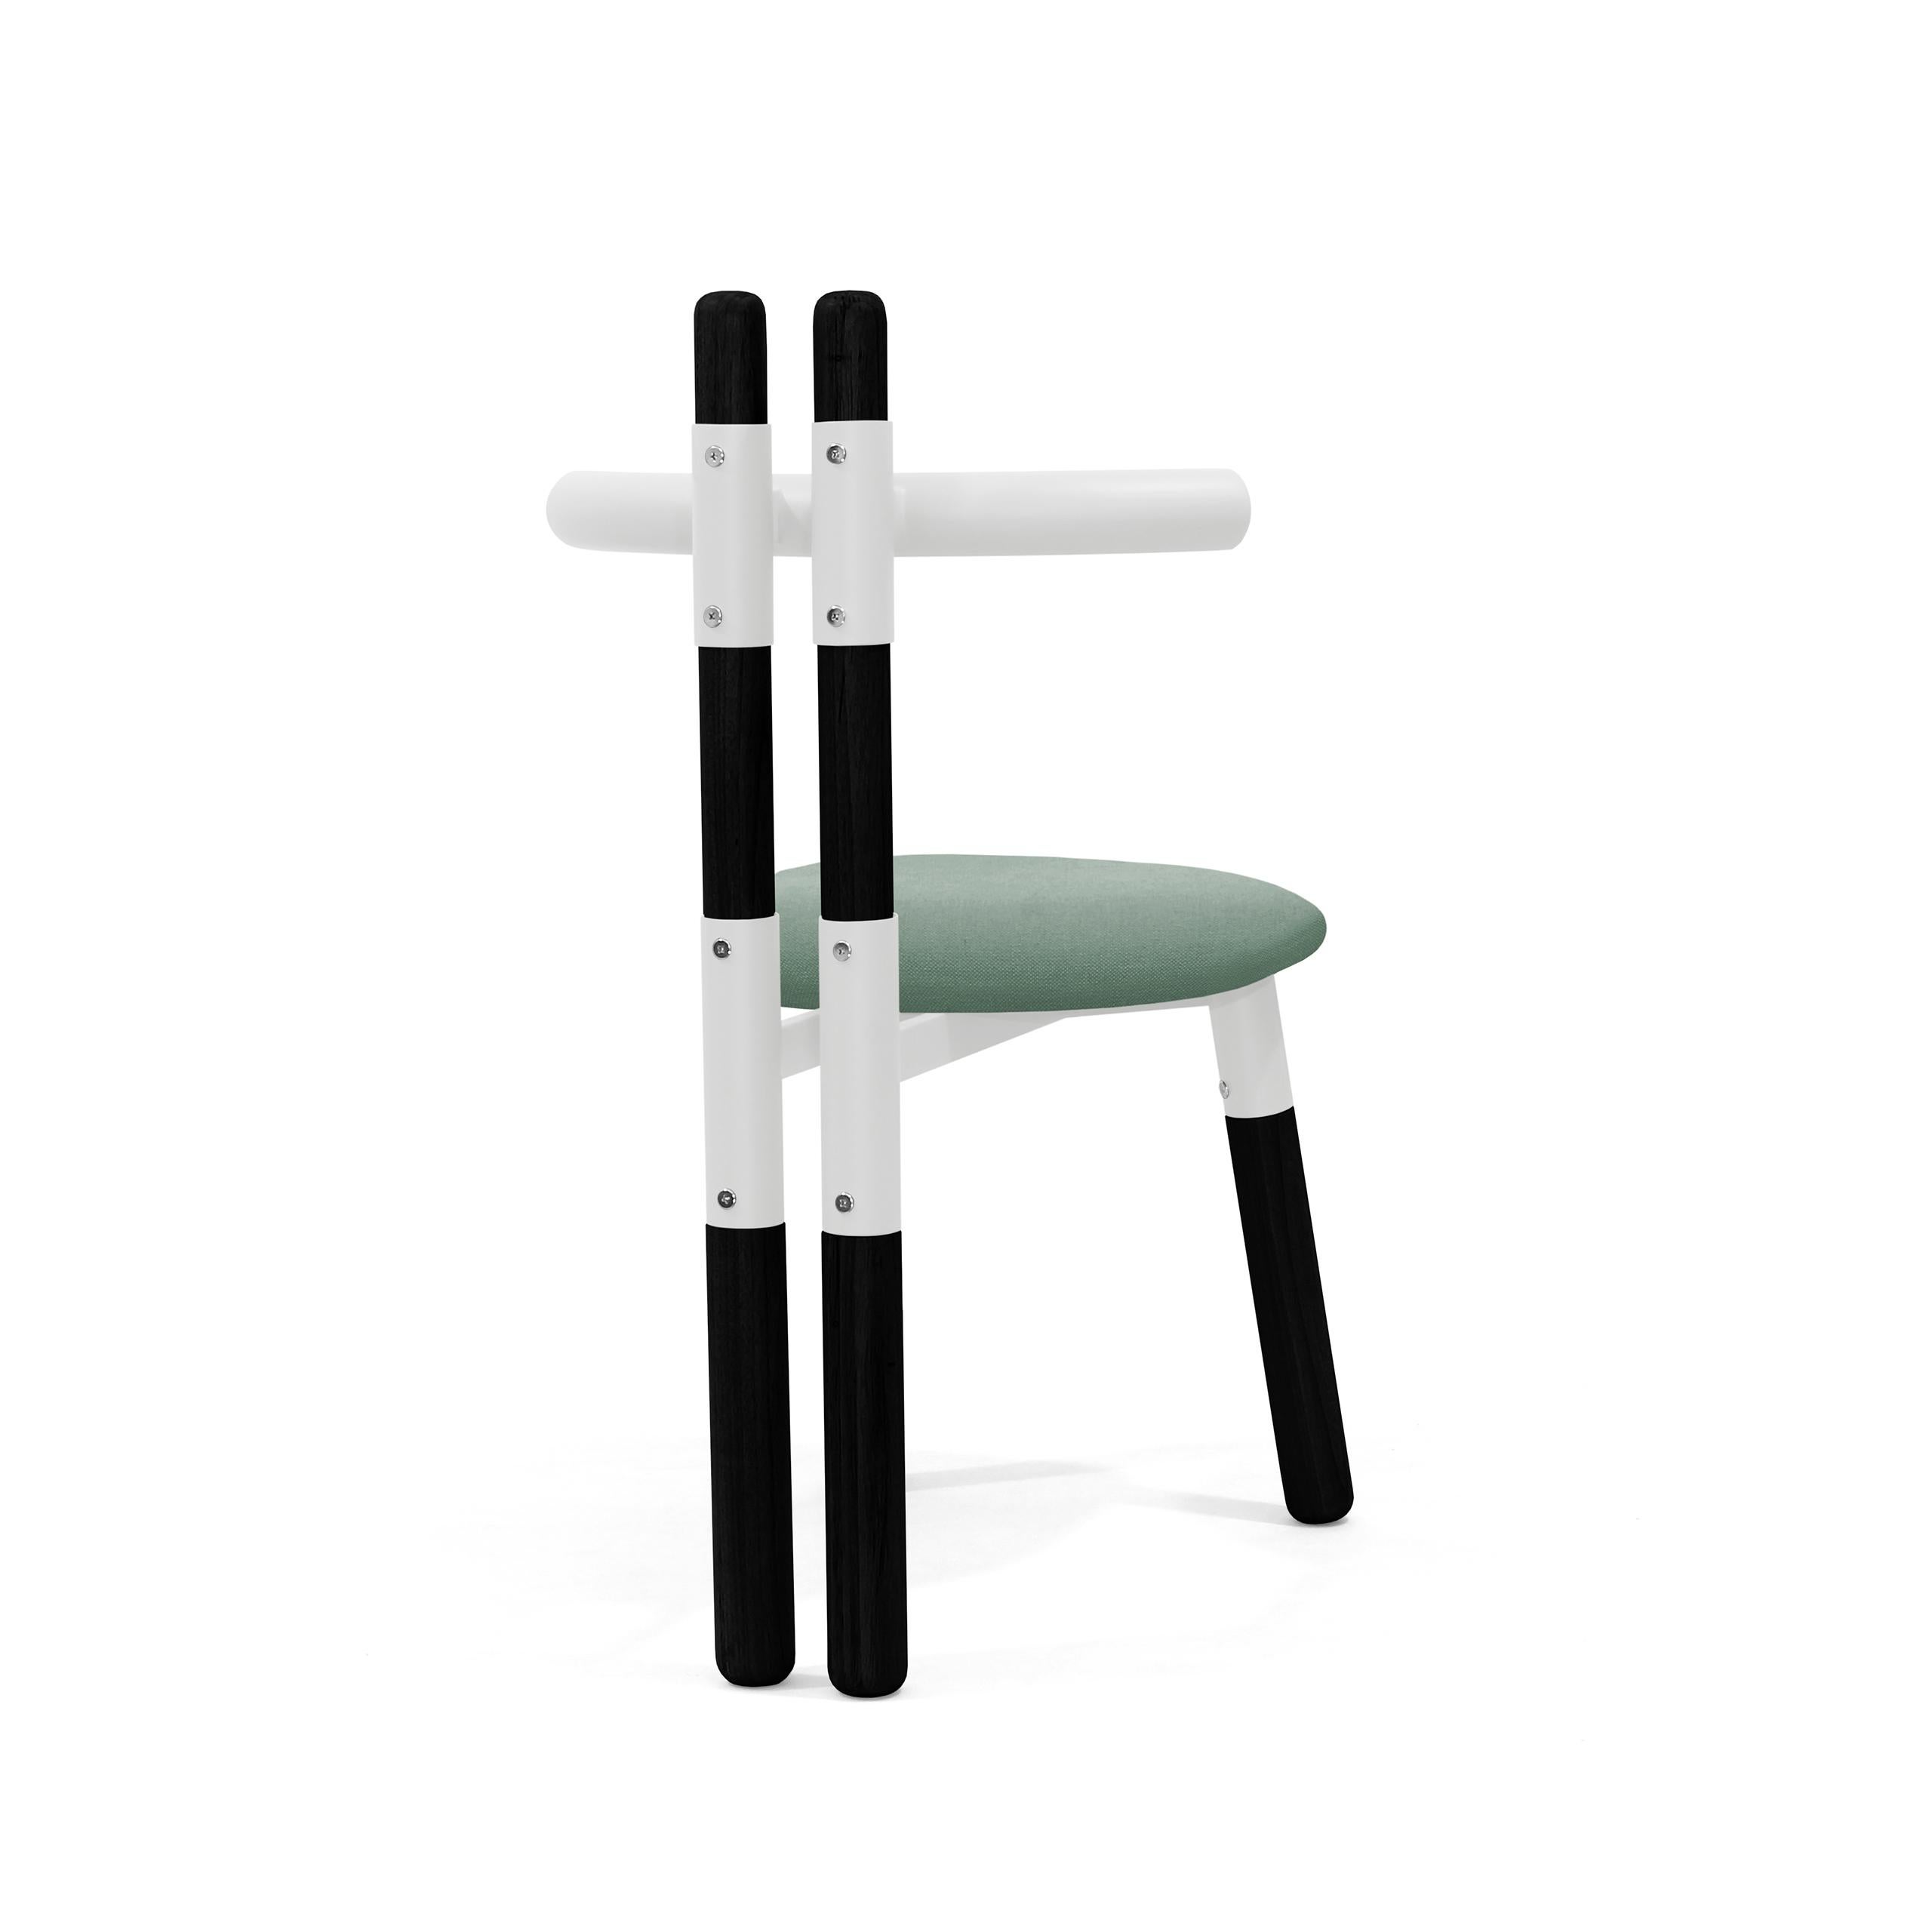 Brazilian Upholstered PK12 Chair, Steel Structure and Ebonized Wood Legs by Paulo Kobylka For Sale